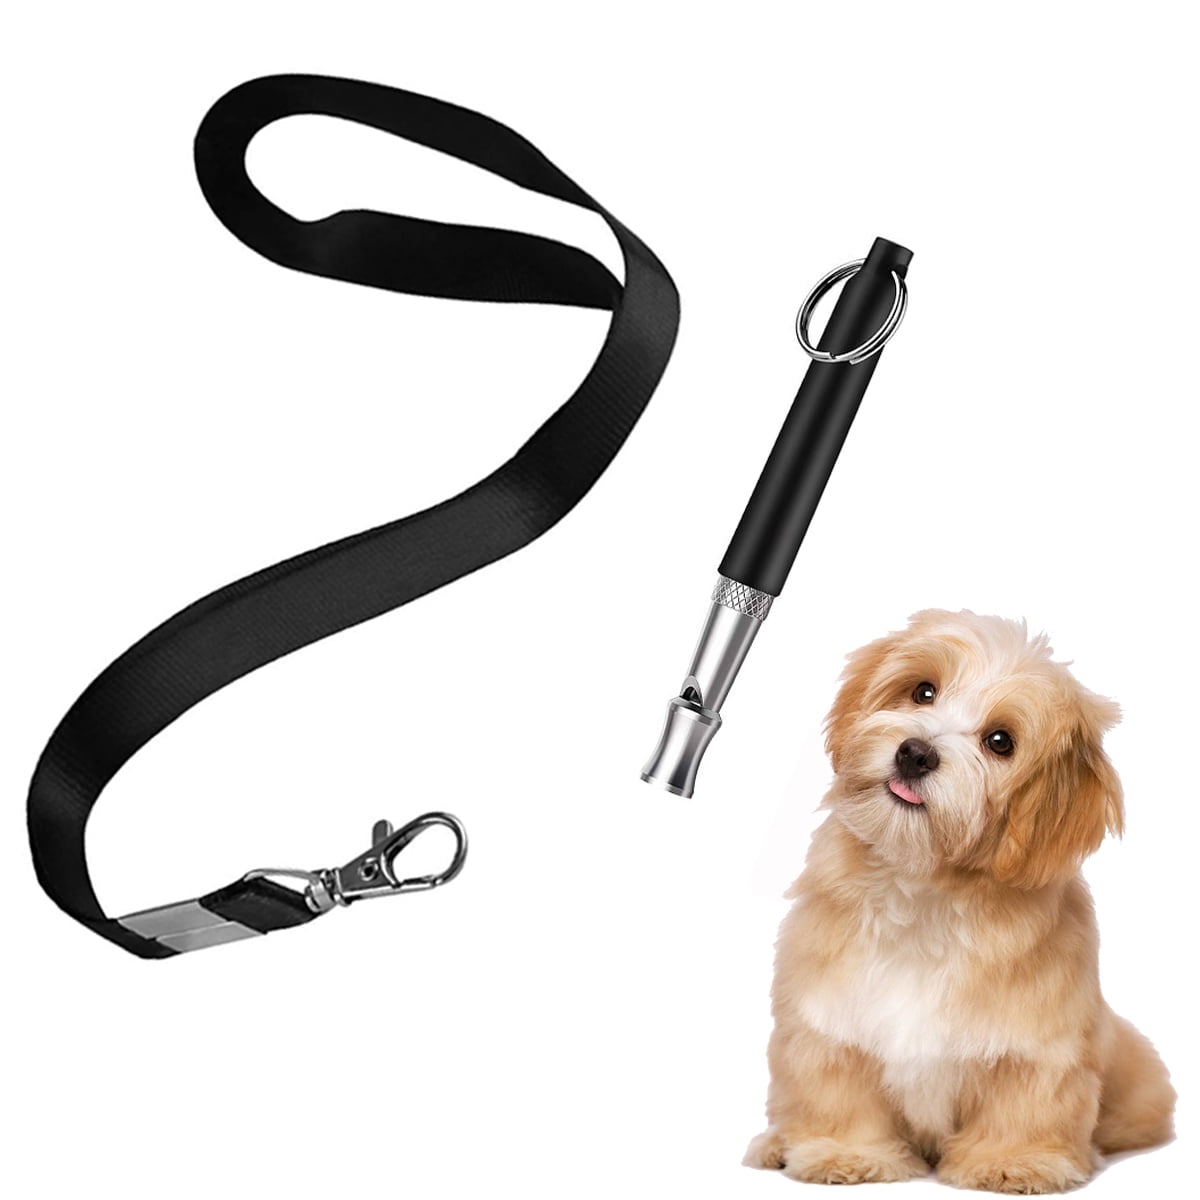 Used for Recall 3PCS Whistle and 3PCS Free Landyards Cestbella Dog Whistle Professional Training Whistle to Stop Barking Gentle Sound and Adjustable Pitch with Free Lanyards 